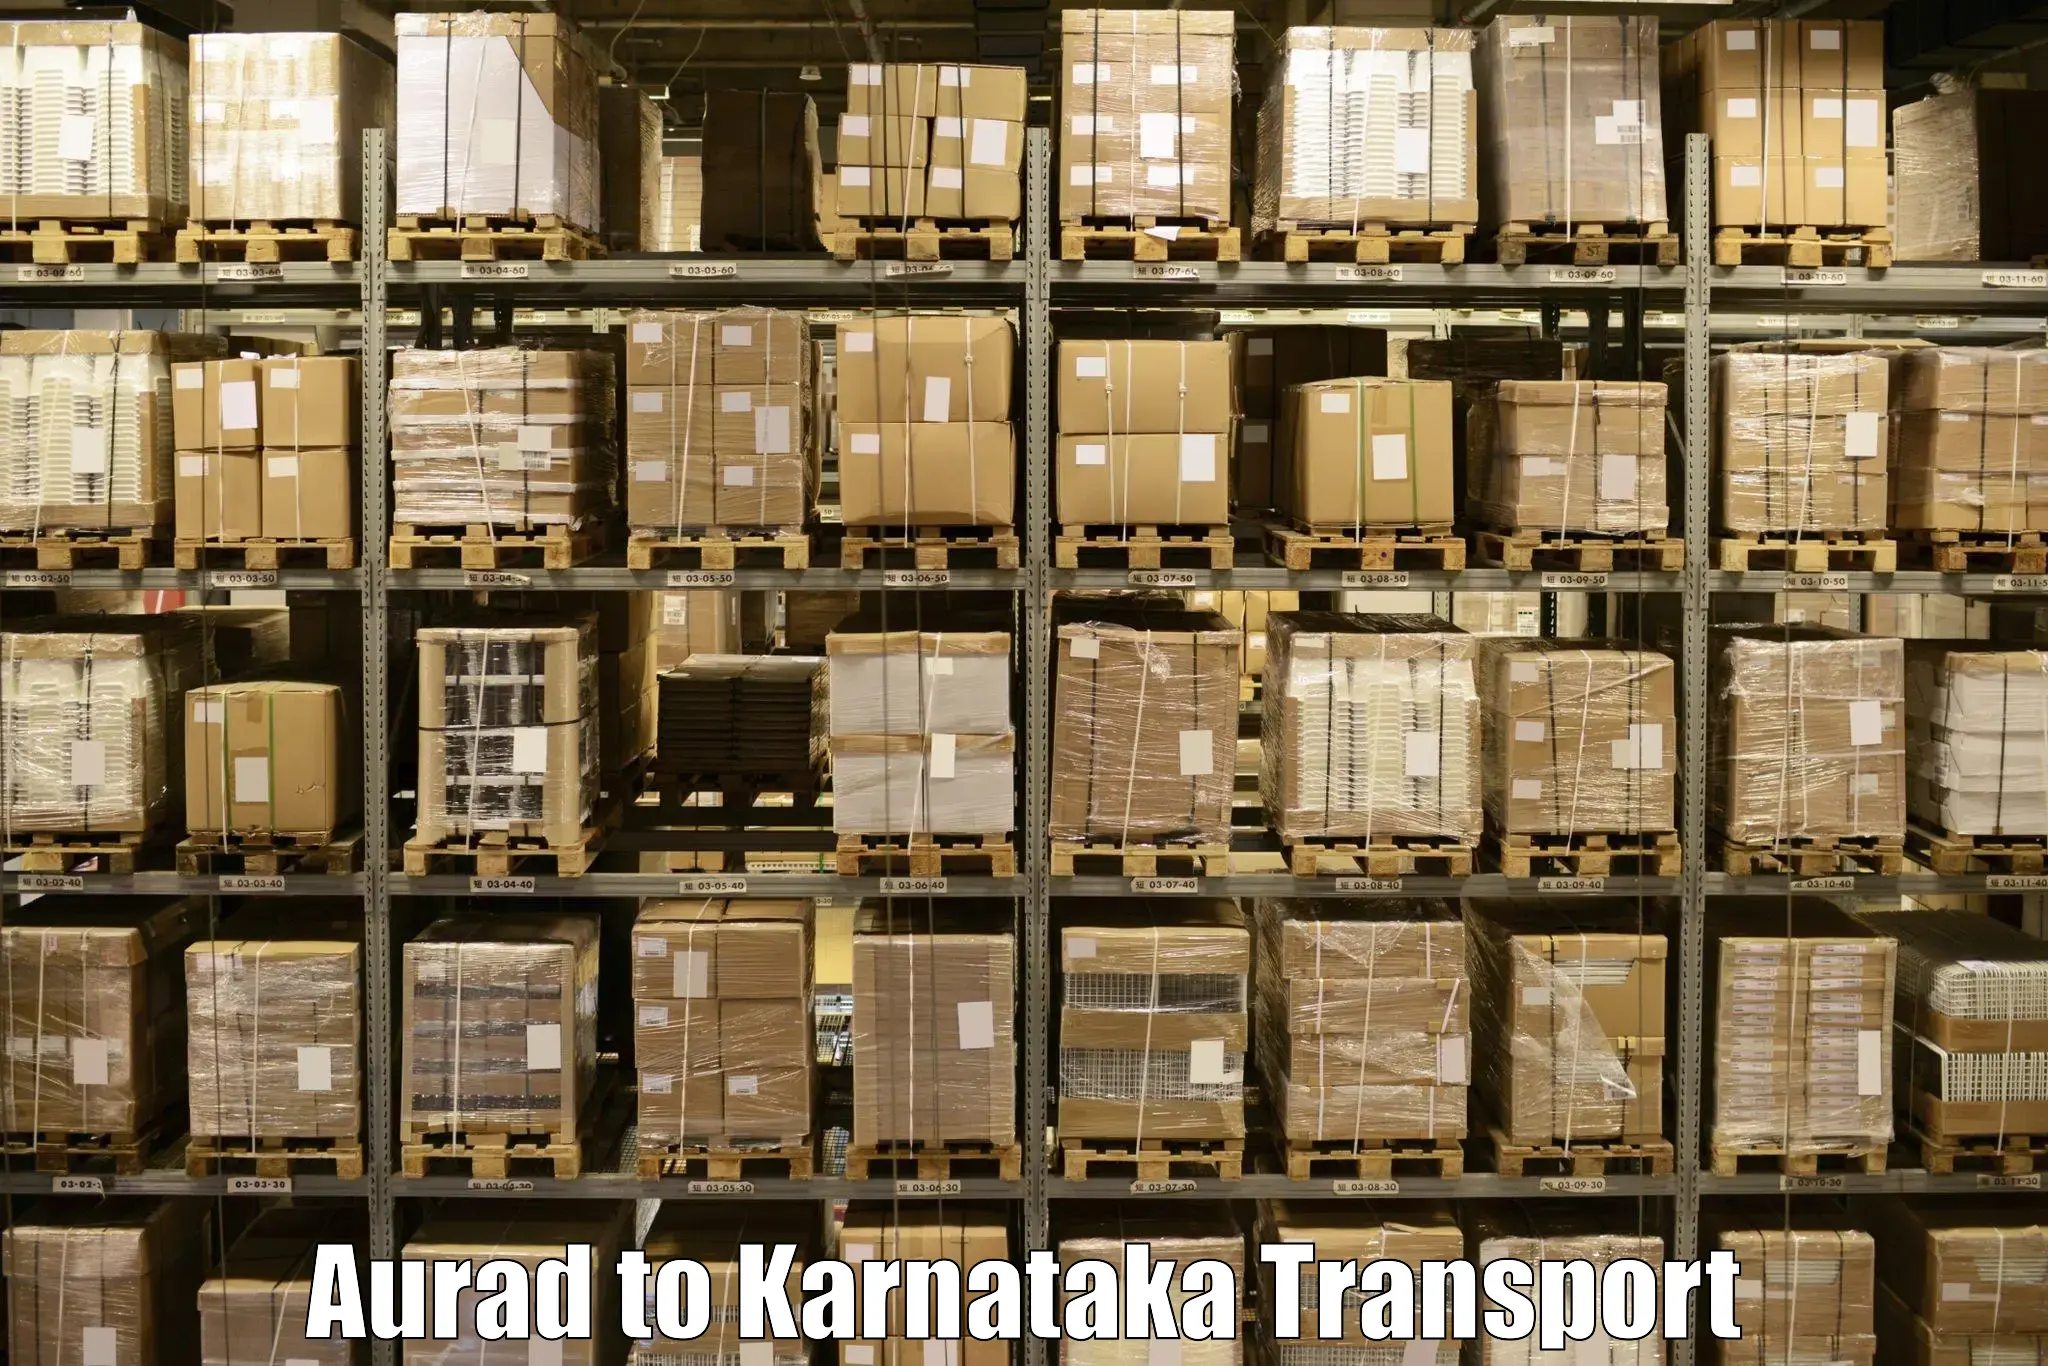 Truck transport companies in India Aurad to Manipal